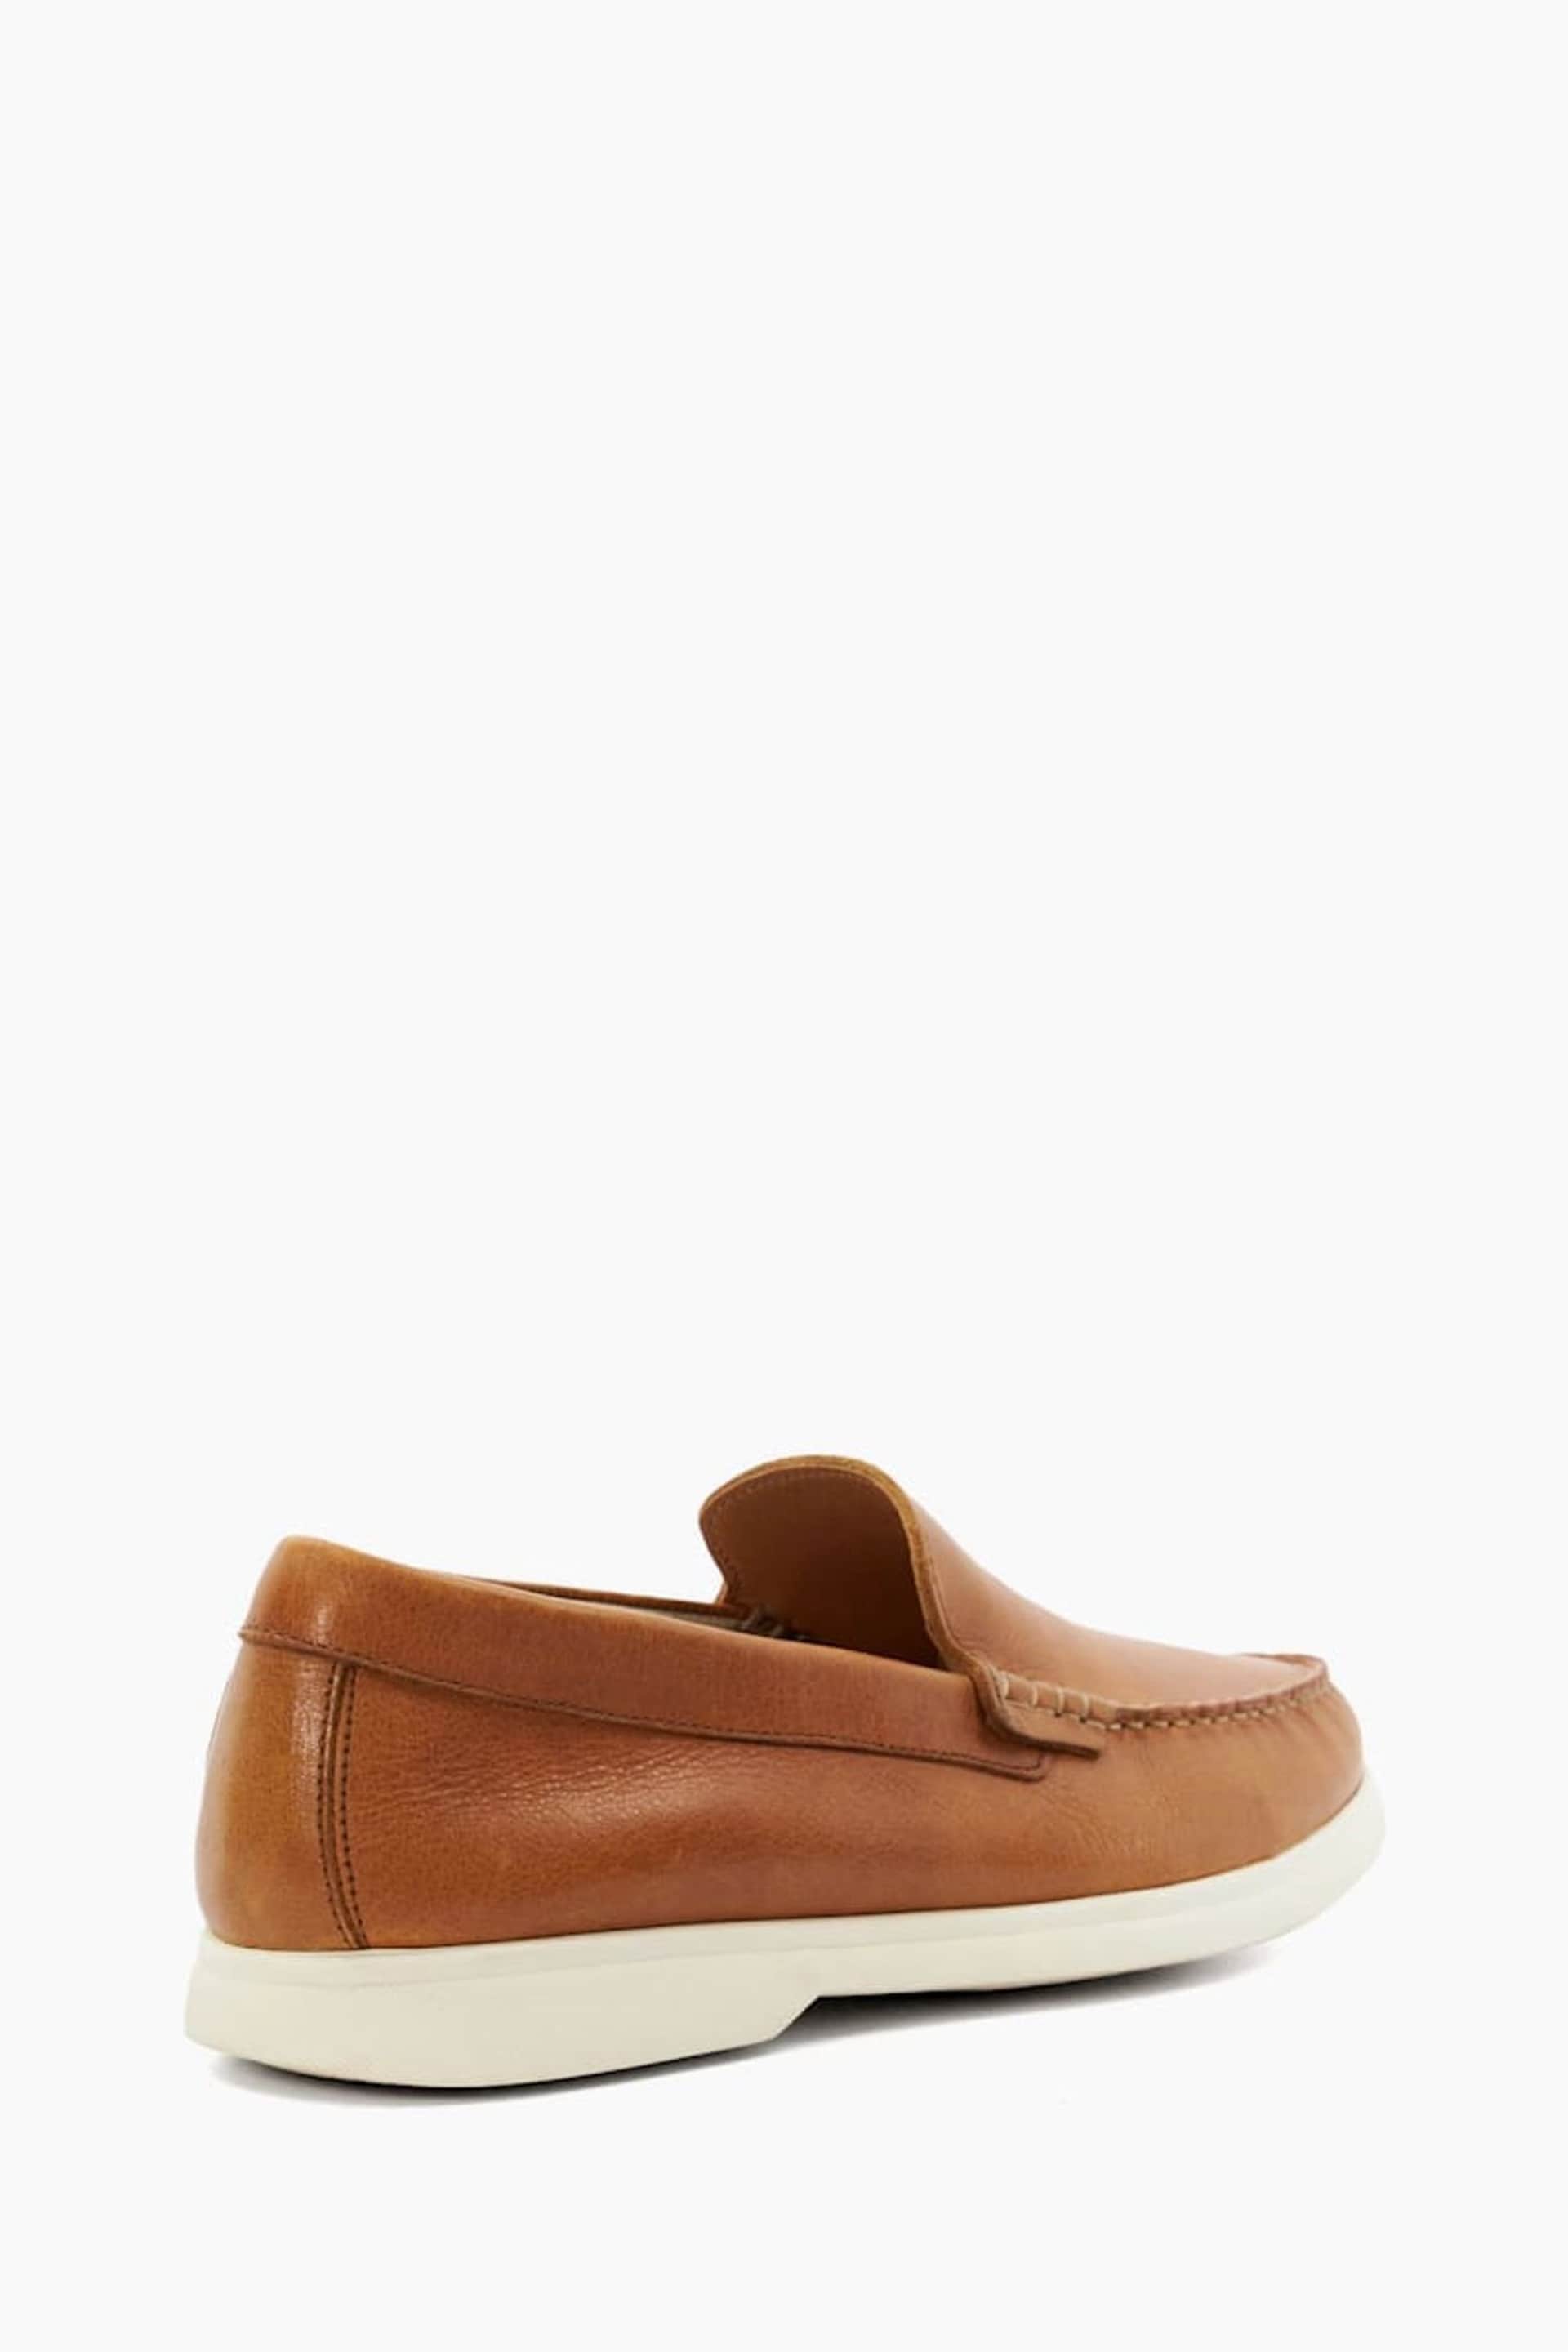 Dune London Brown Buftonn Sole Loafers - Image 5 of 6